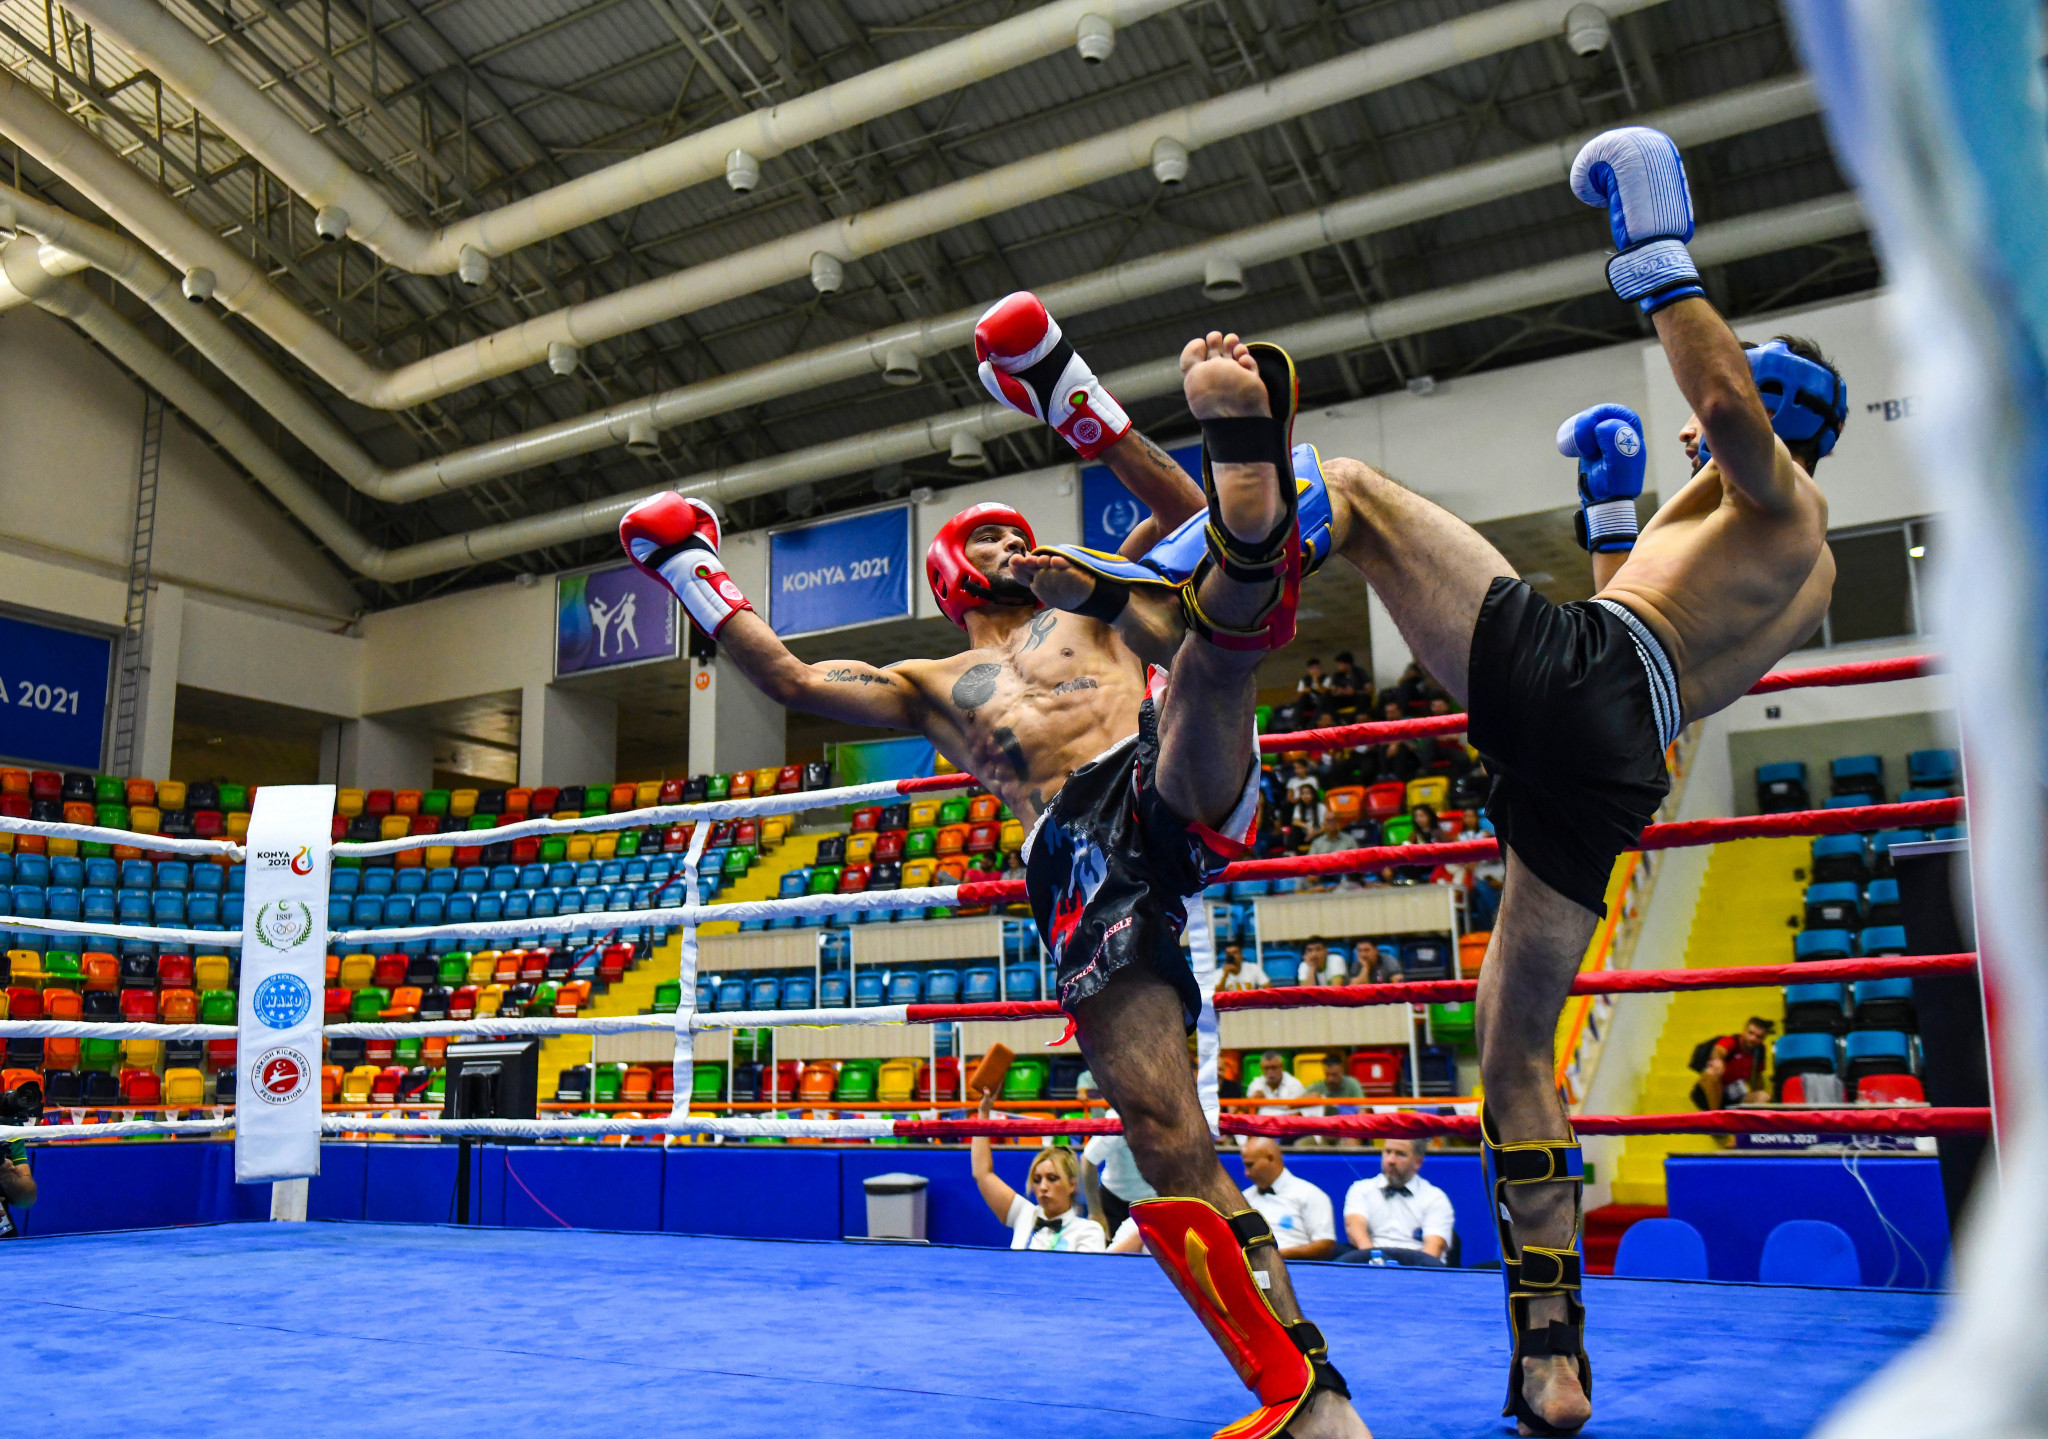 The first of three days of kickboxing action took place today at the Selcuklu Municipality Sports Hall ©Konya 2021